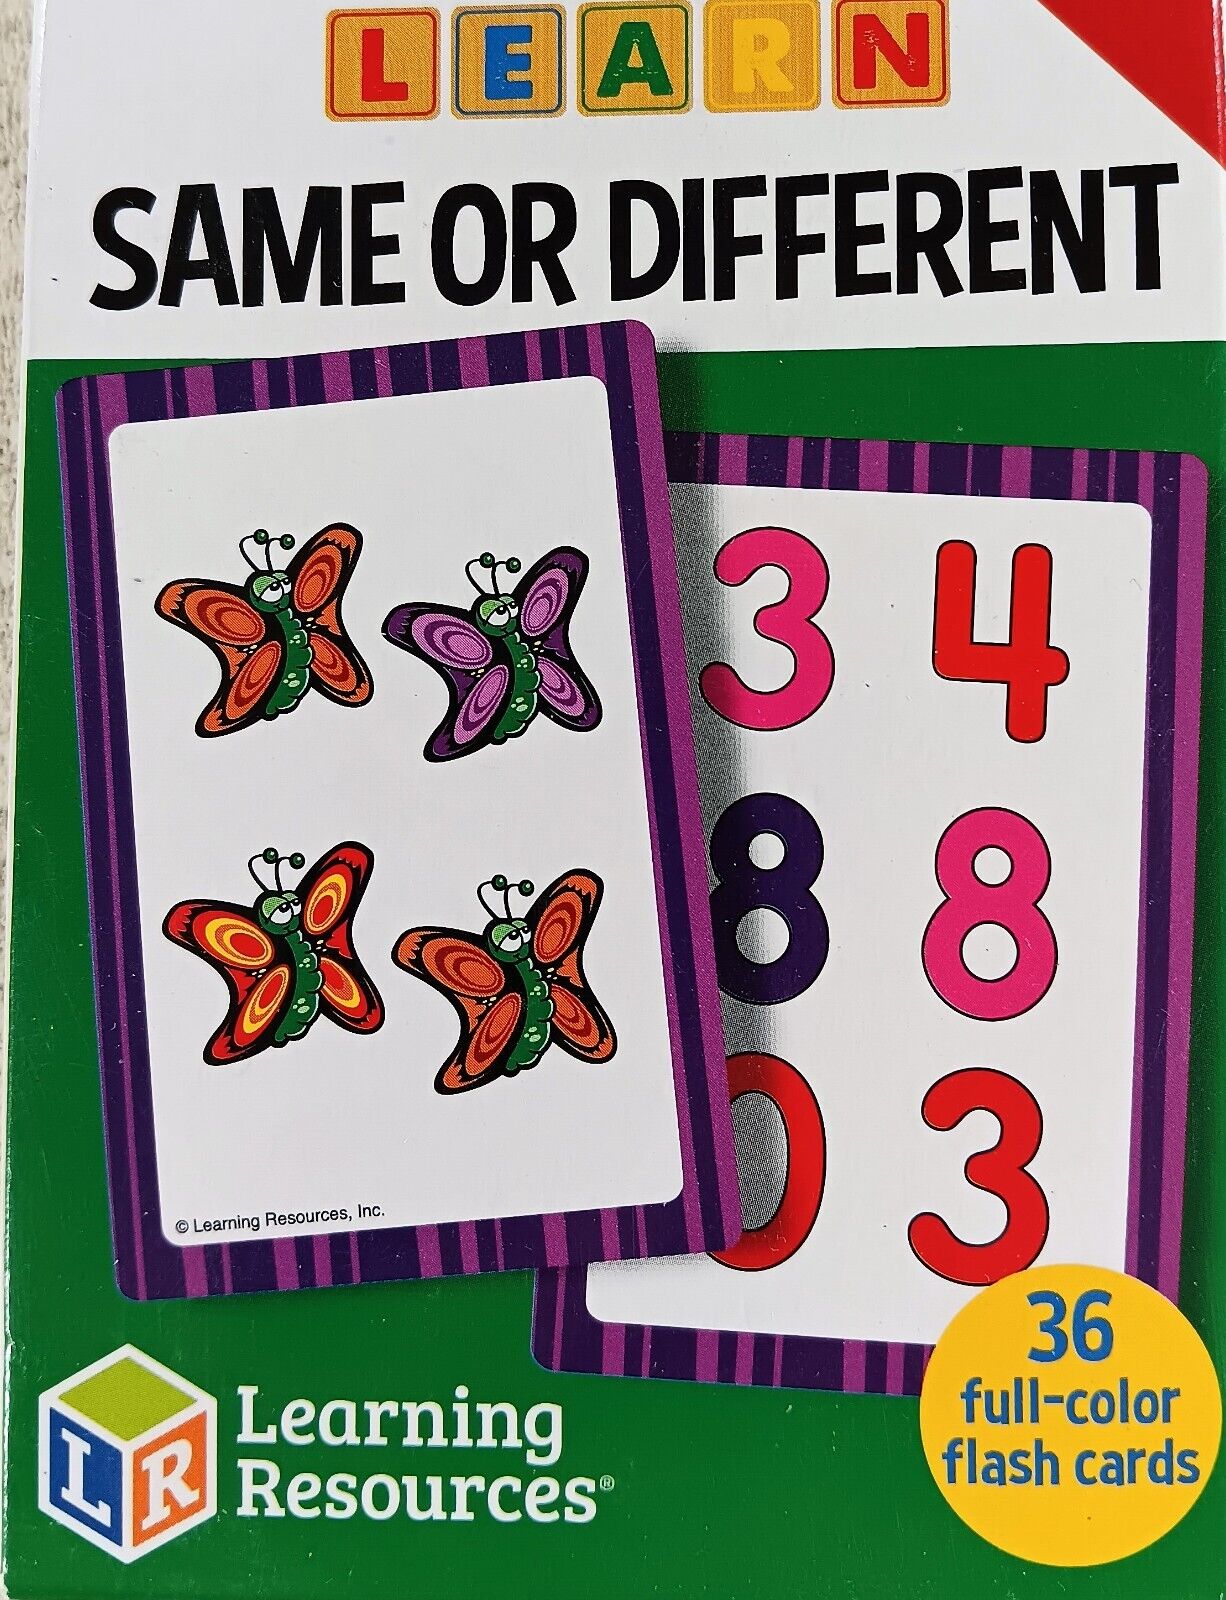 Learn Same or Different 36 Full Color Flash Cards by Learning Resources